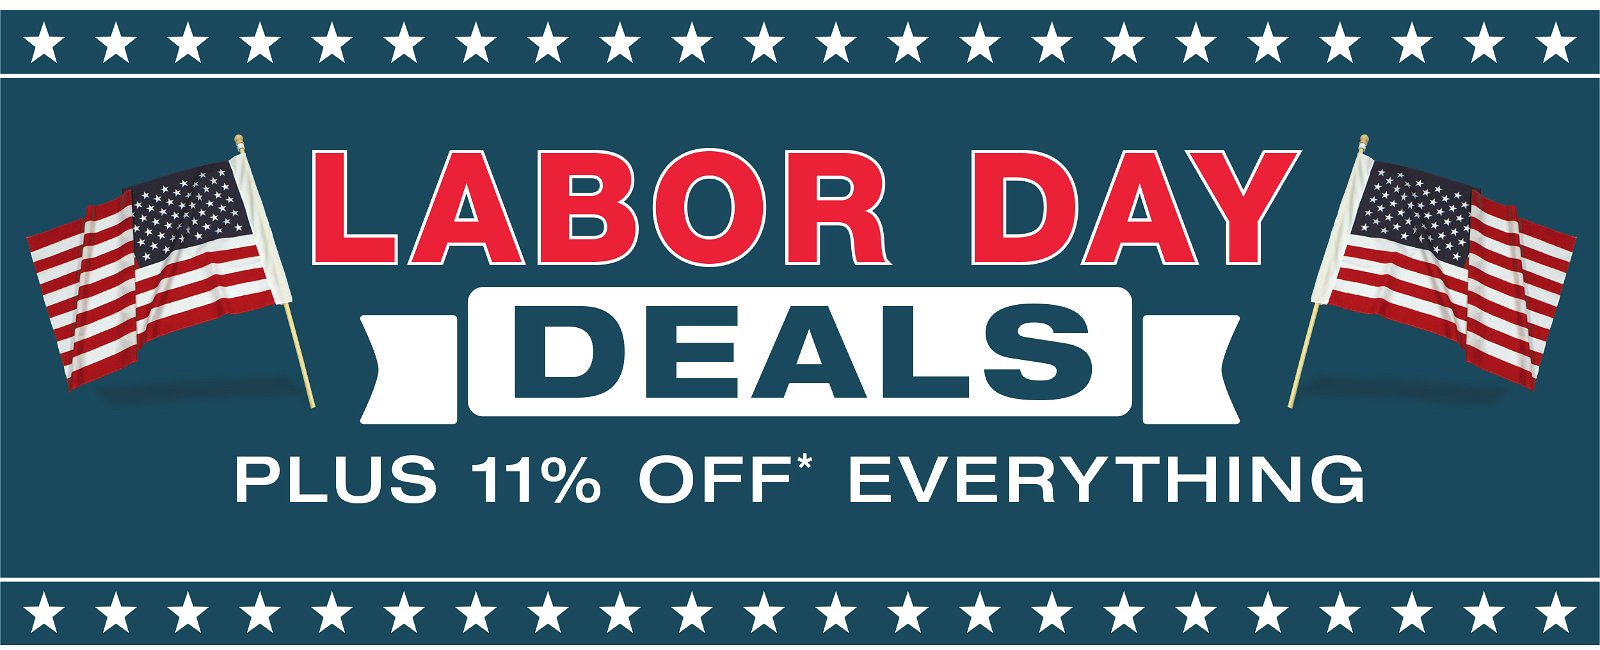 Menards Labor Day Deals PLUS 11 OFF* Everything! Milled